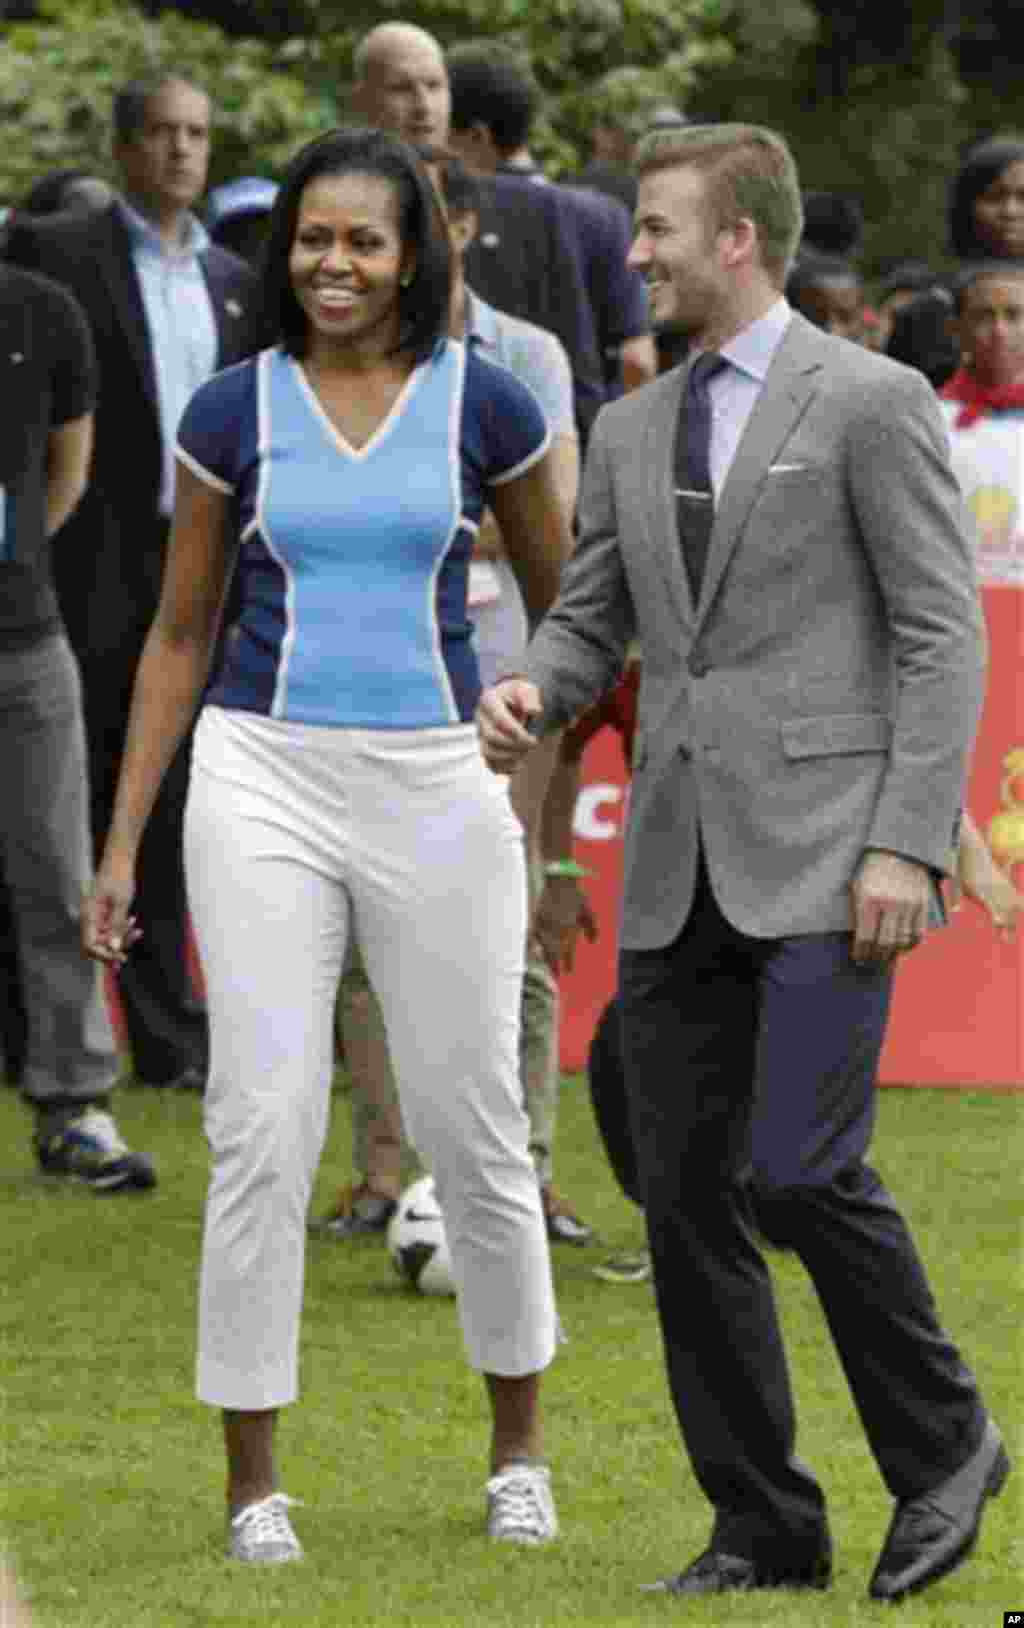 U.S. first lady Michelle Obama, left, walks with soccer player David Beckham during a 'Let's Move!' event for about 1,000 American military children and American and British students at the U.S. ambassador's residence in London, ahead of the 2012 Summer O